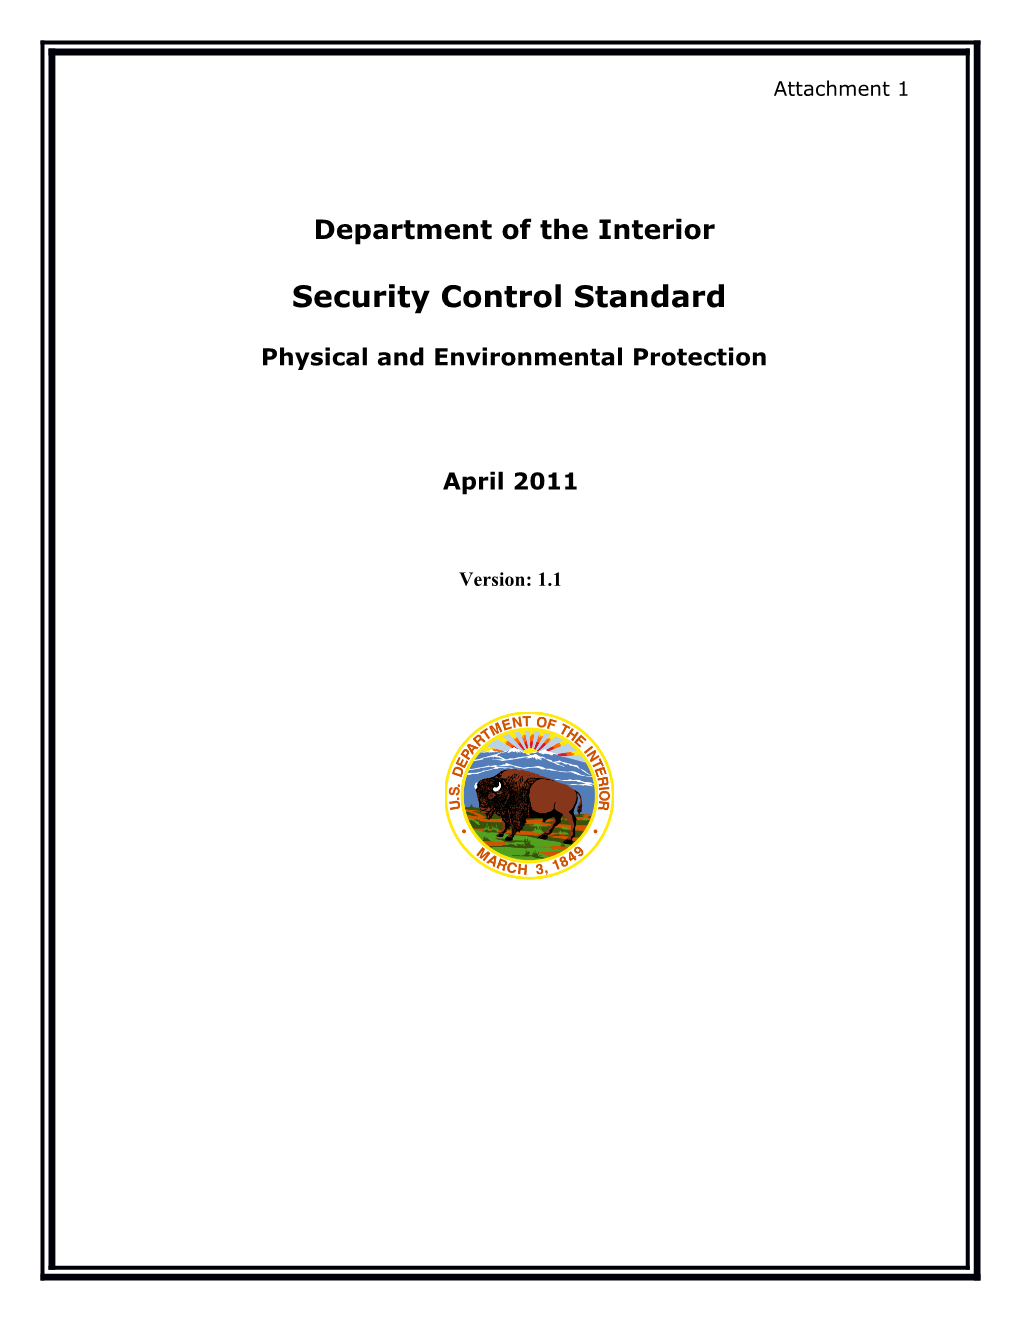 Department of the Interior Security Control Standard Physical and Environmental Protection